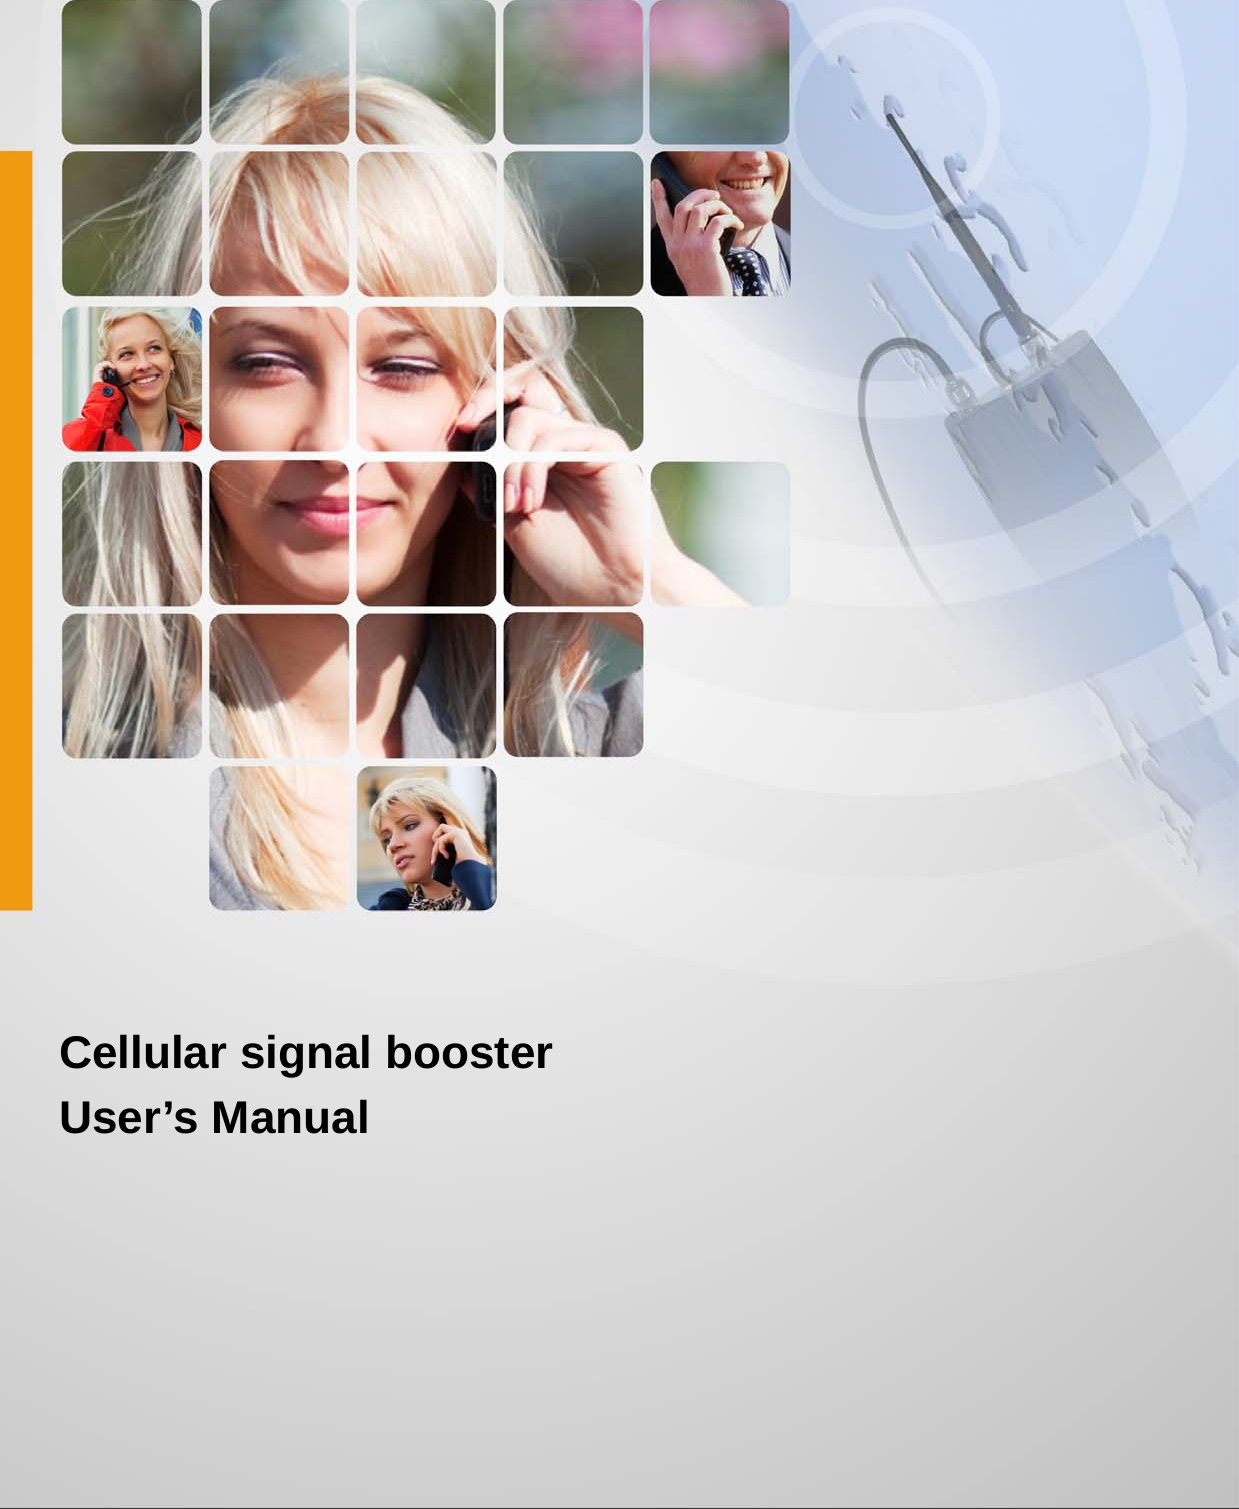                    Cellular signal booster User’s Manual  